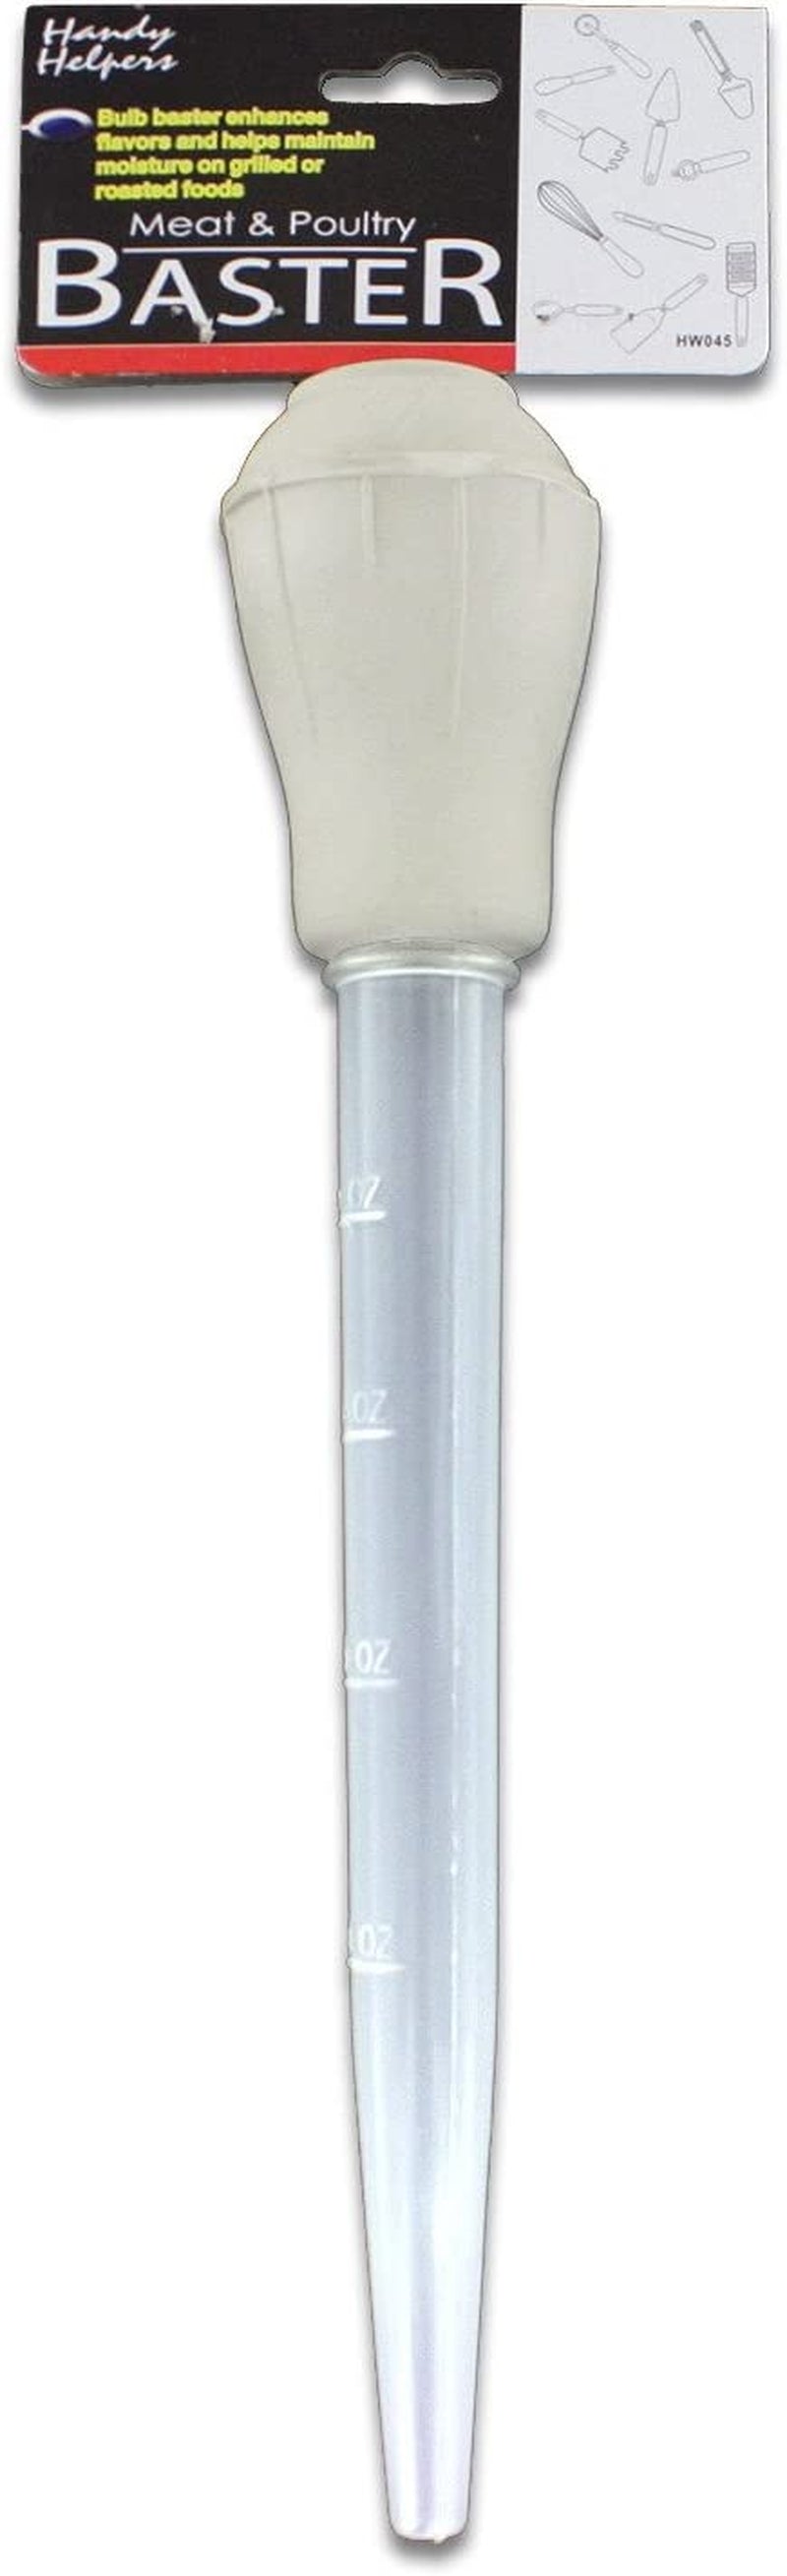 Meat and Poultry Baster